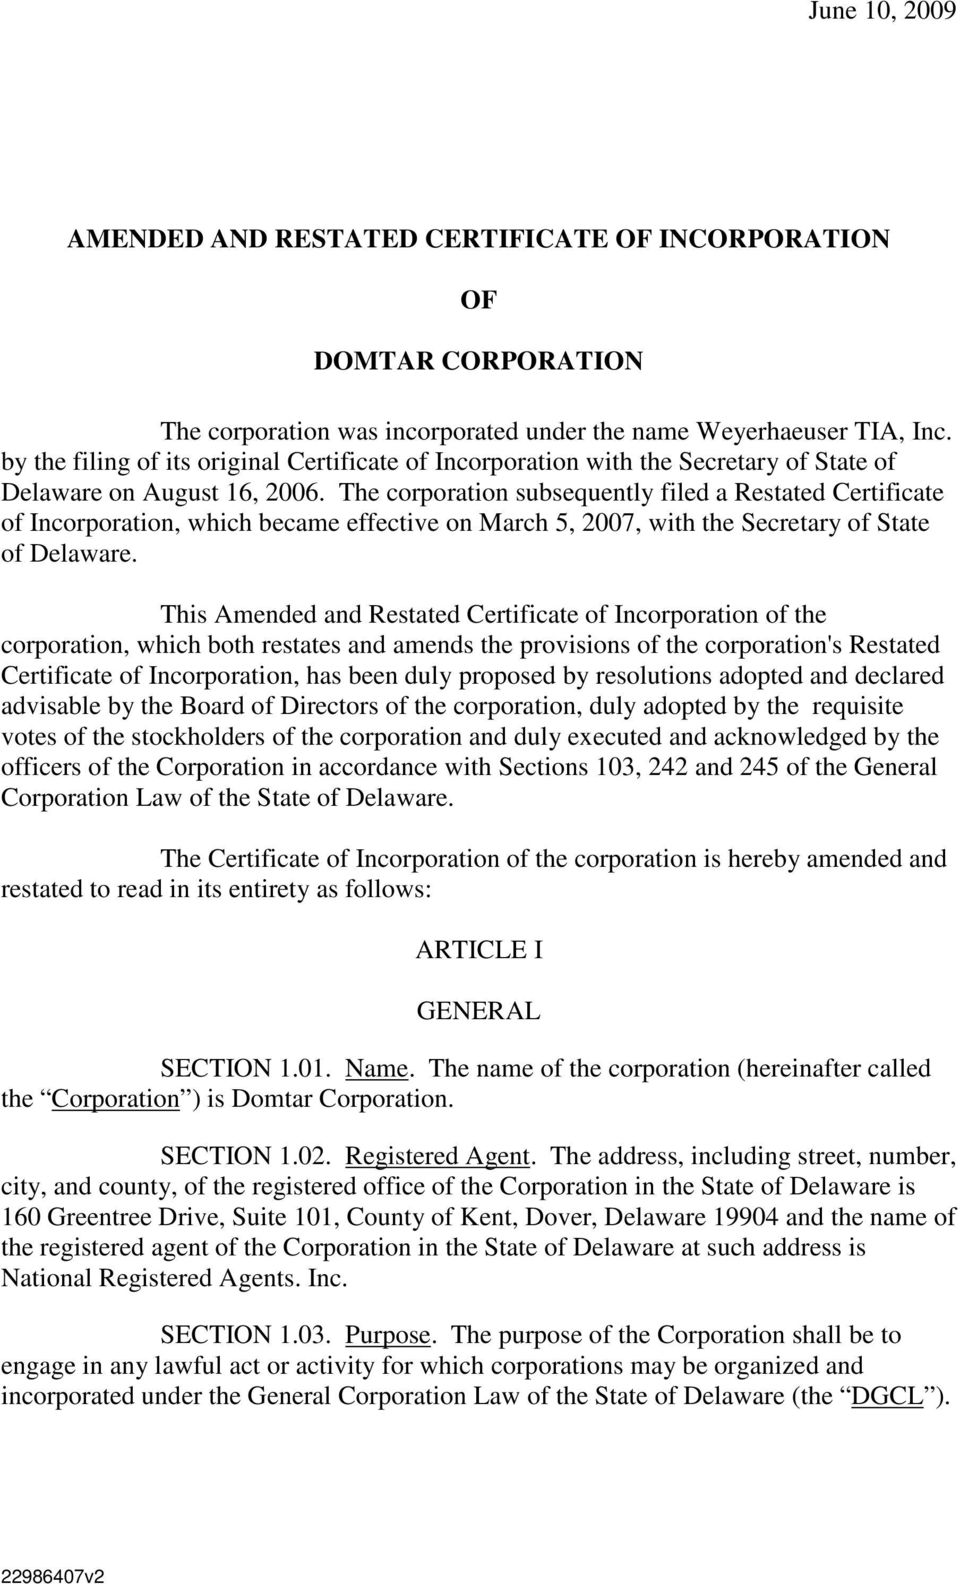 The corporation subsequently filed a Restated Certificate of Incorporation, which became effective on March 5, 2007, with the Secretary of State of Delaware.